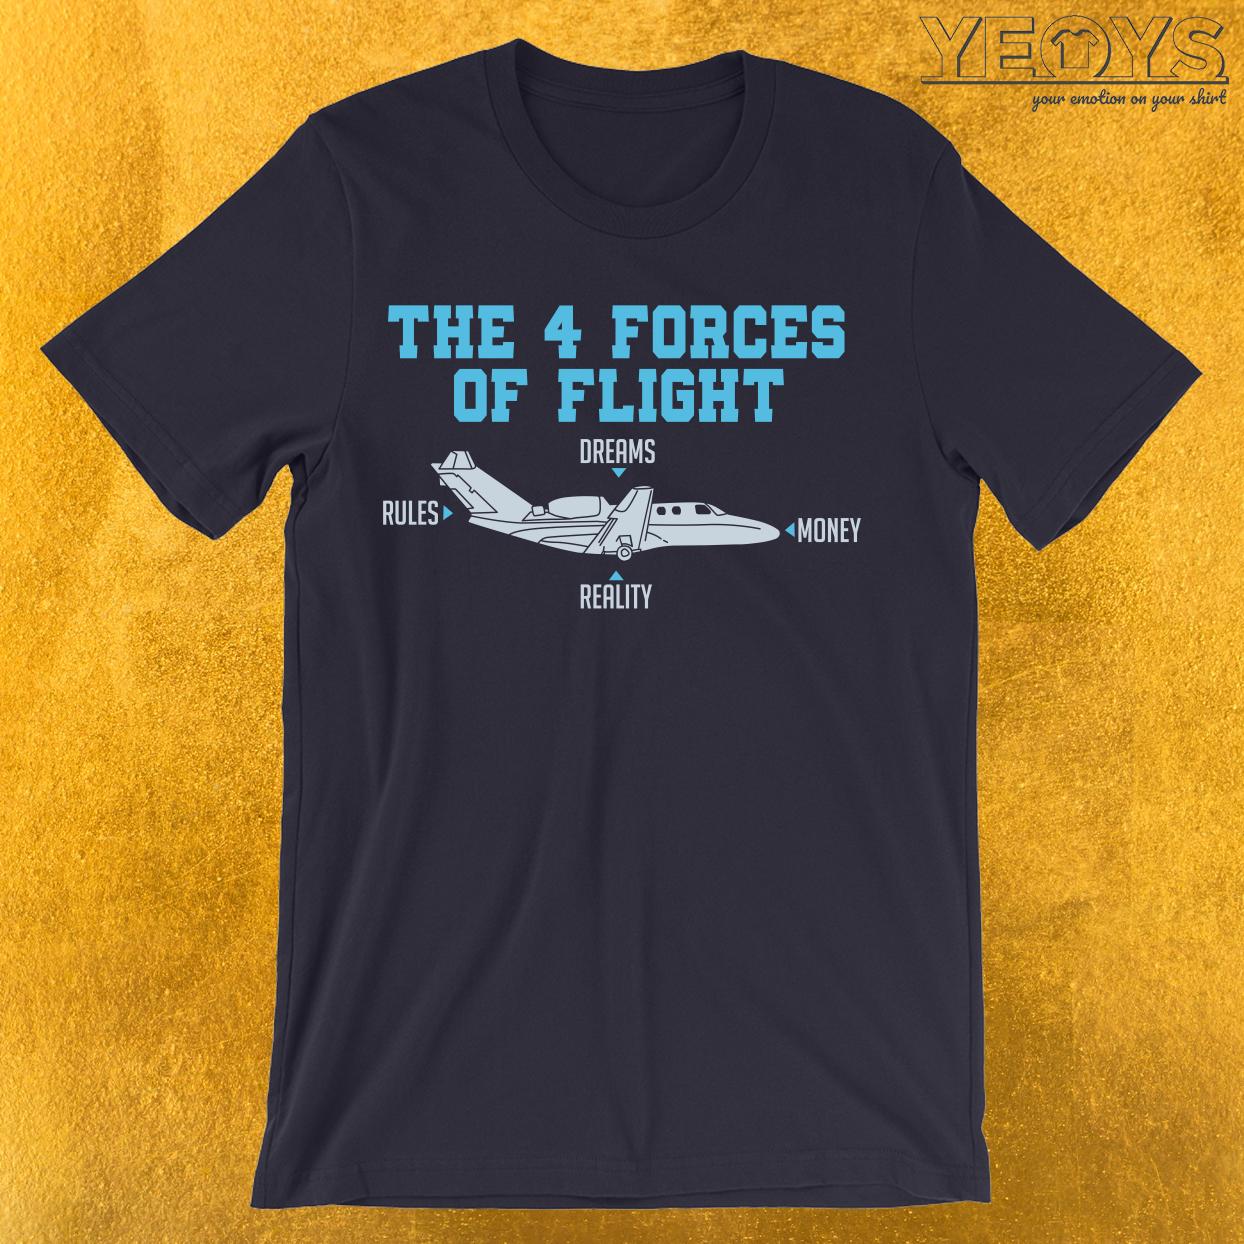 The 4 Forces Of Flight T-Shirt